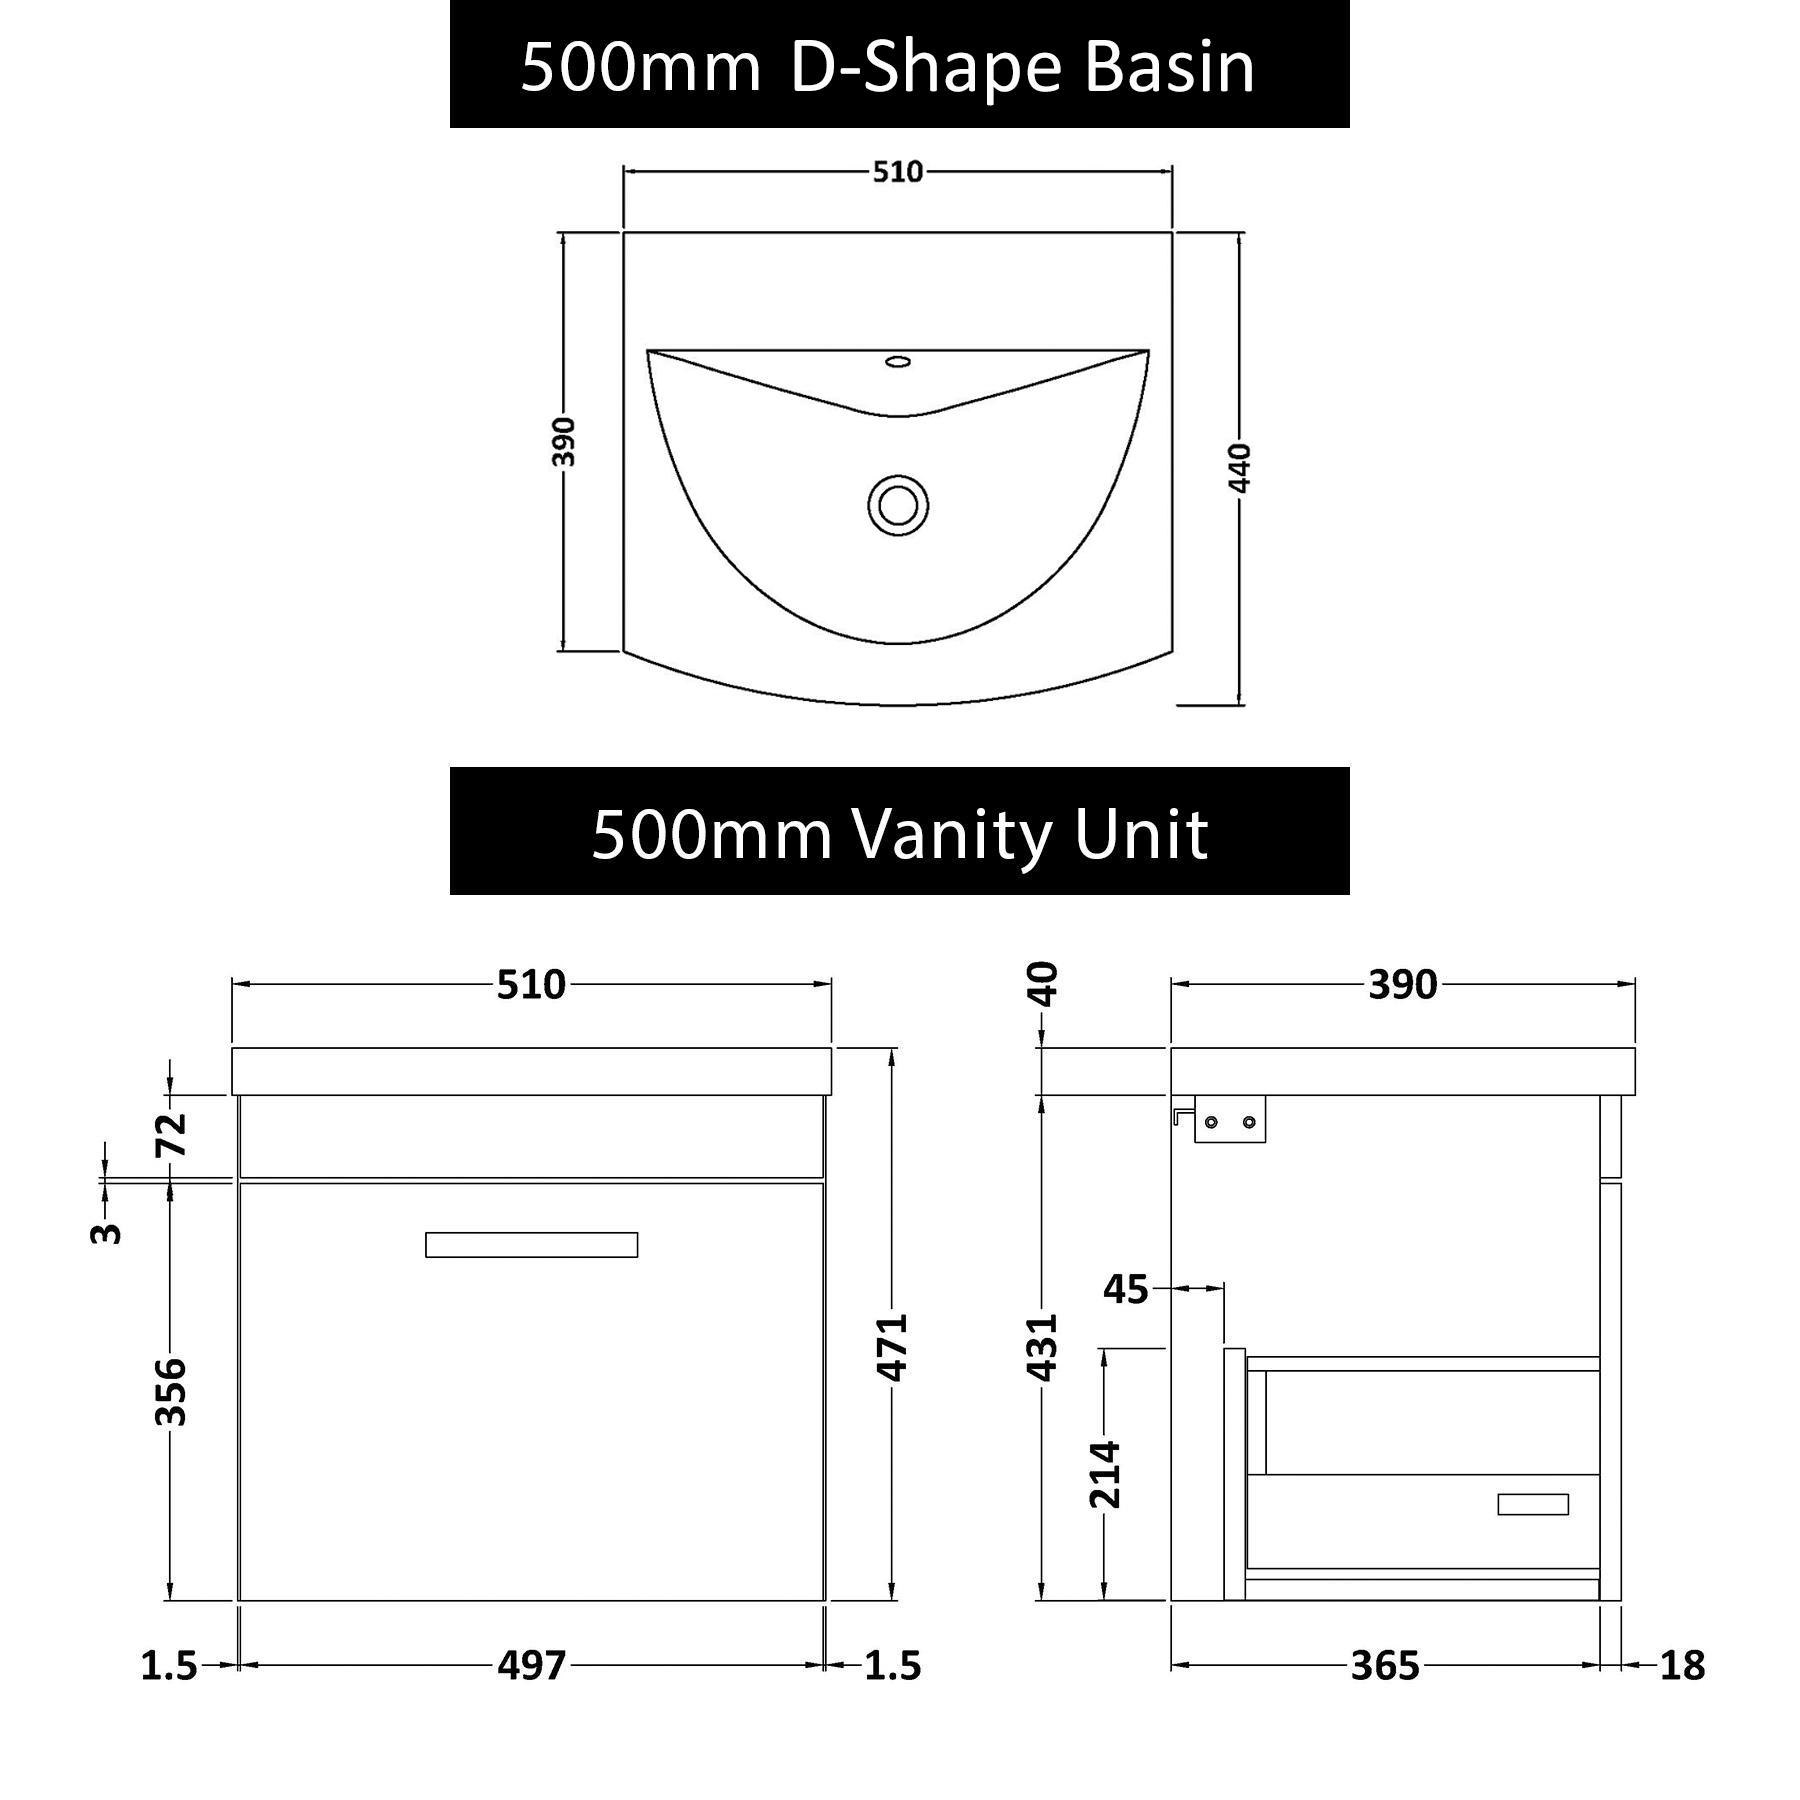 Marbella 500mm Wall Hung Vanity Unit with 1 Drawer Gloss White Cabinet & Curved Basin